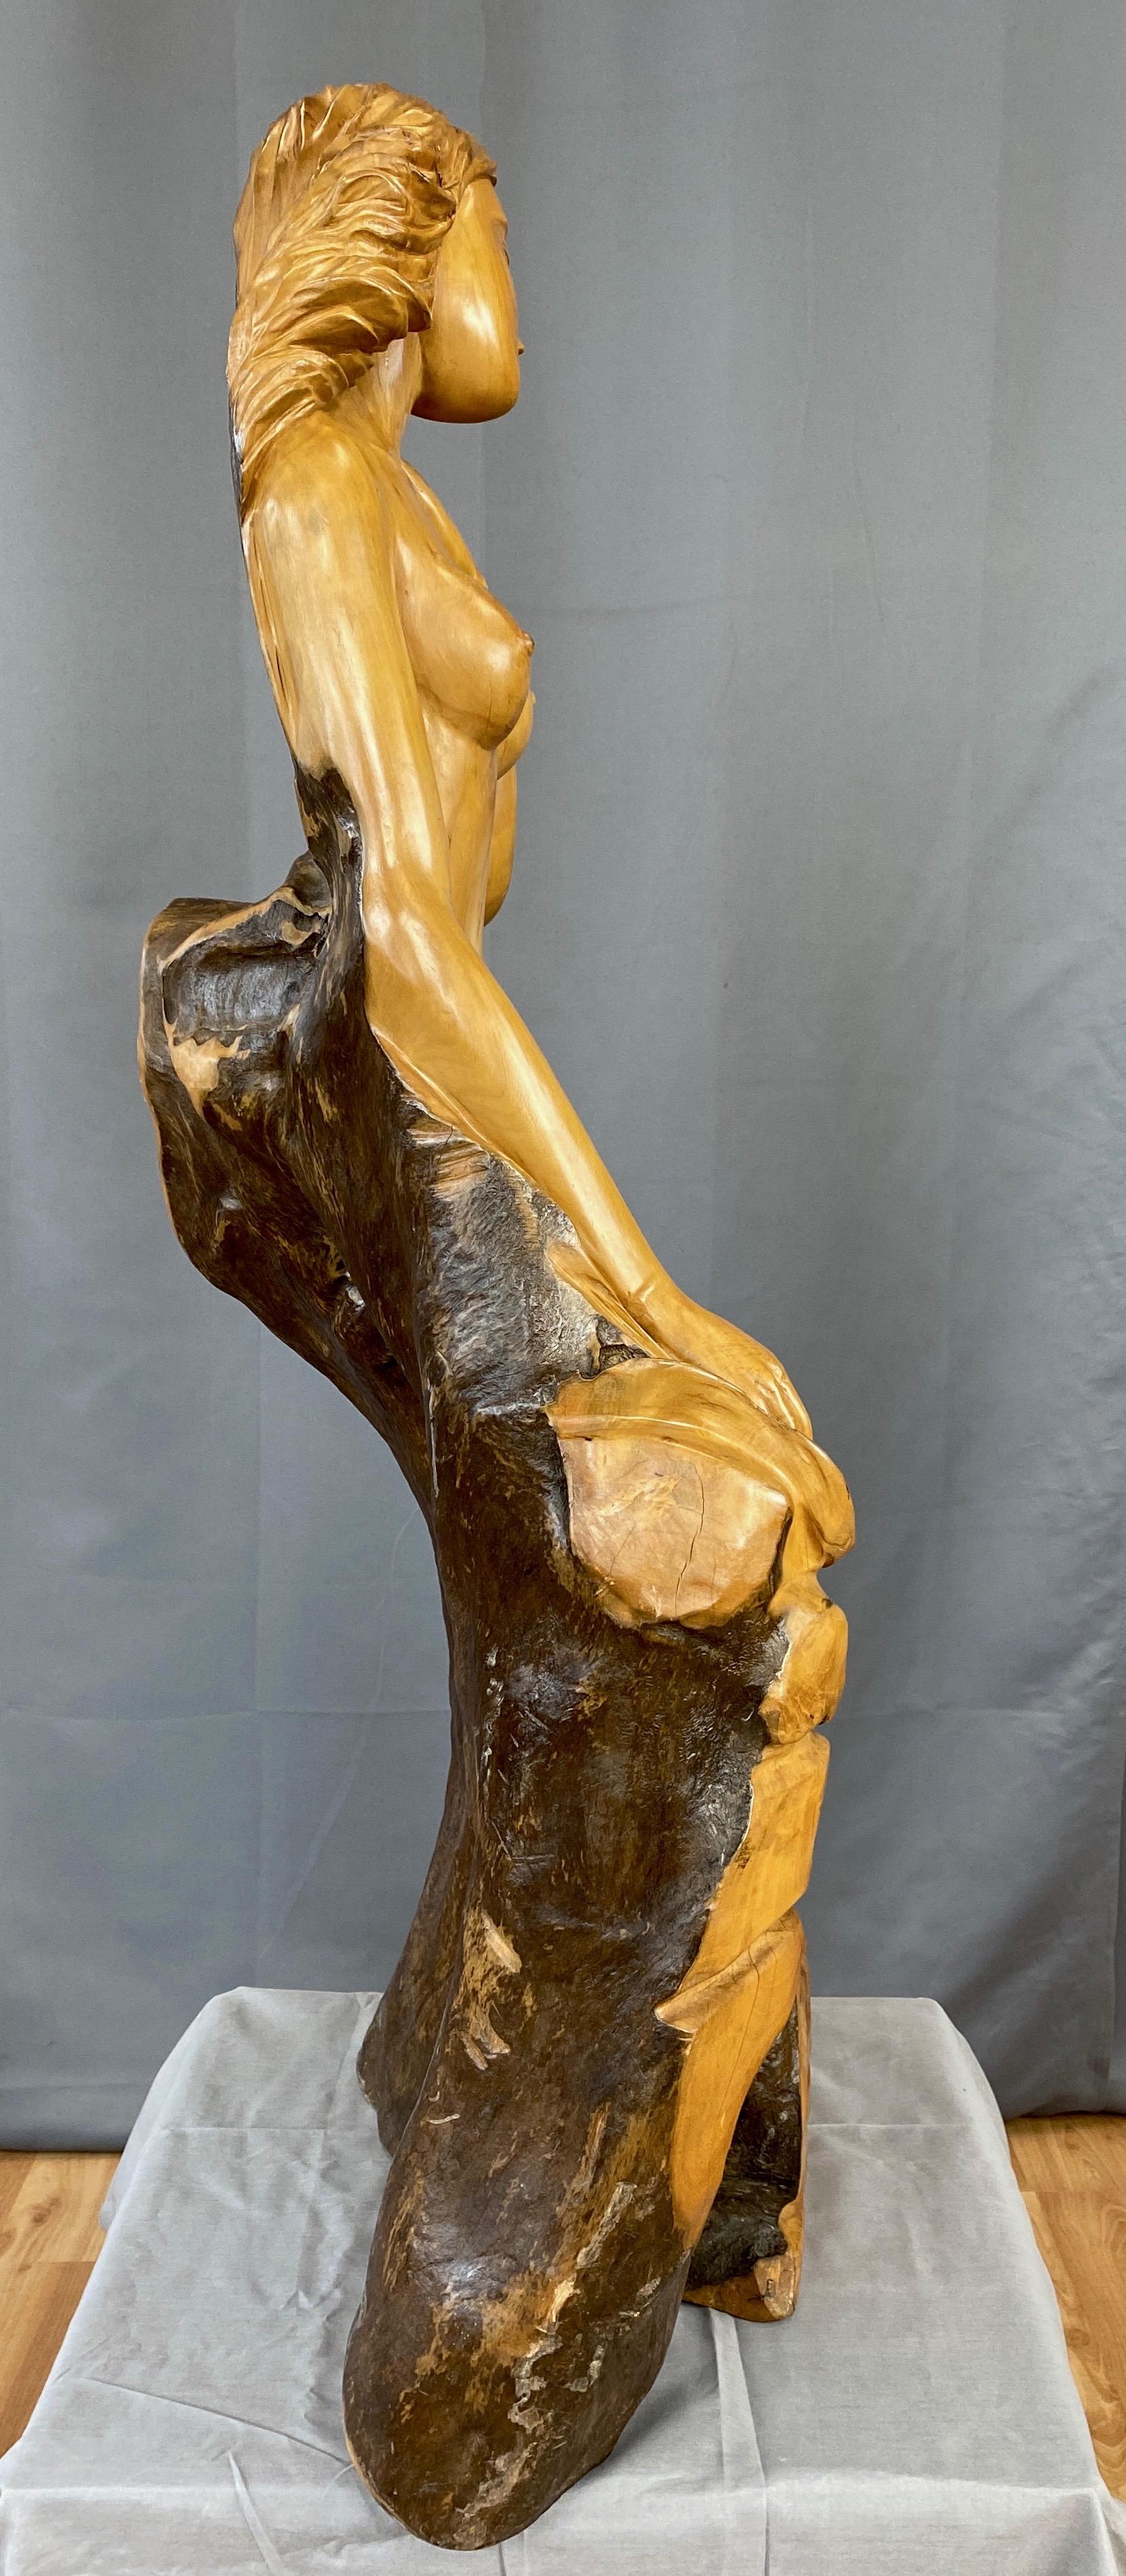 Late 20th Century Large Hand-Carved Cypress Knee Figural Sculpture After Botticelli's Venus, 1970s For Sale